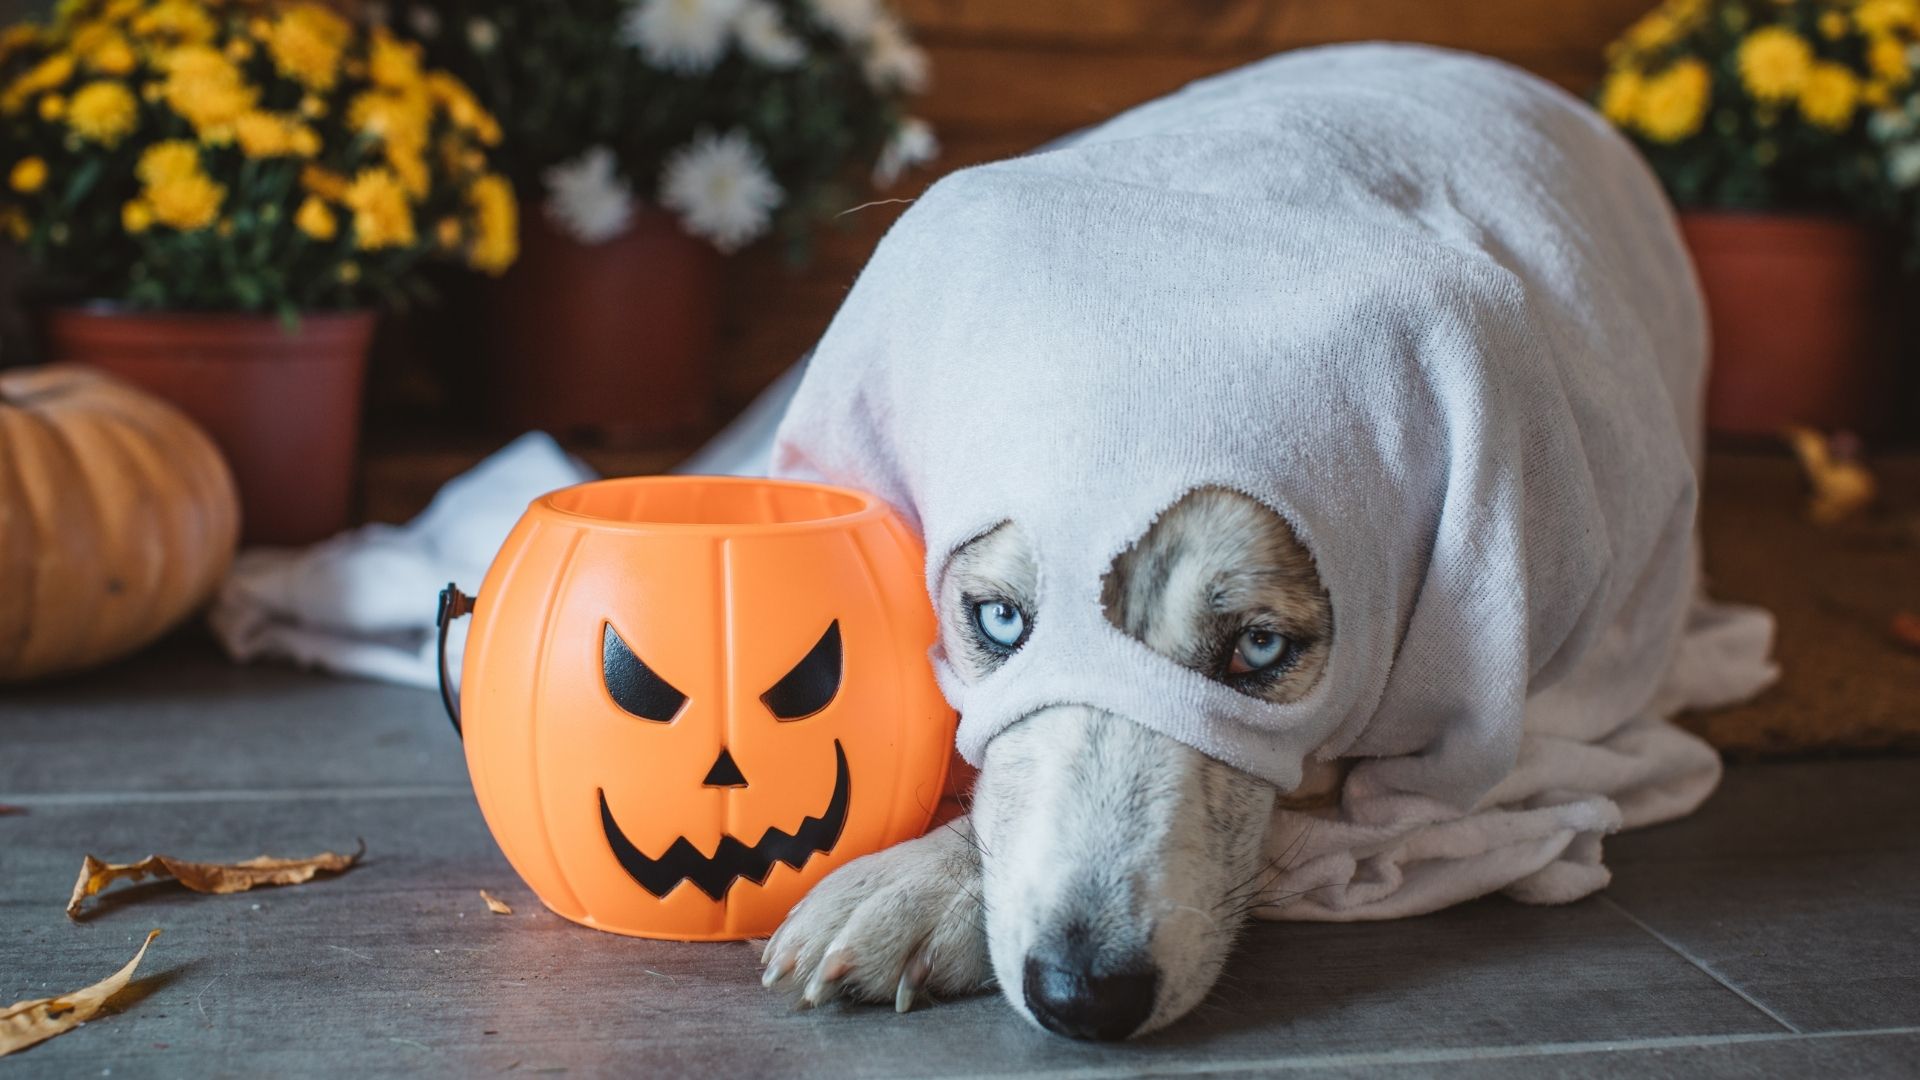 Need Help With Your Pet During Halloween?